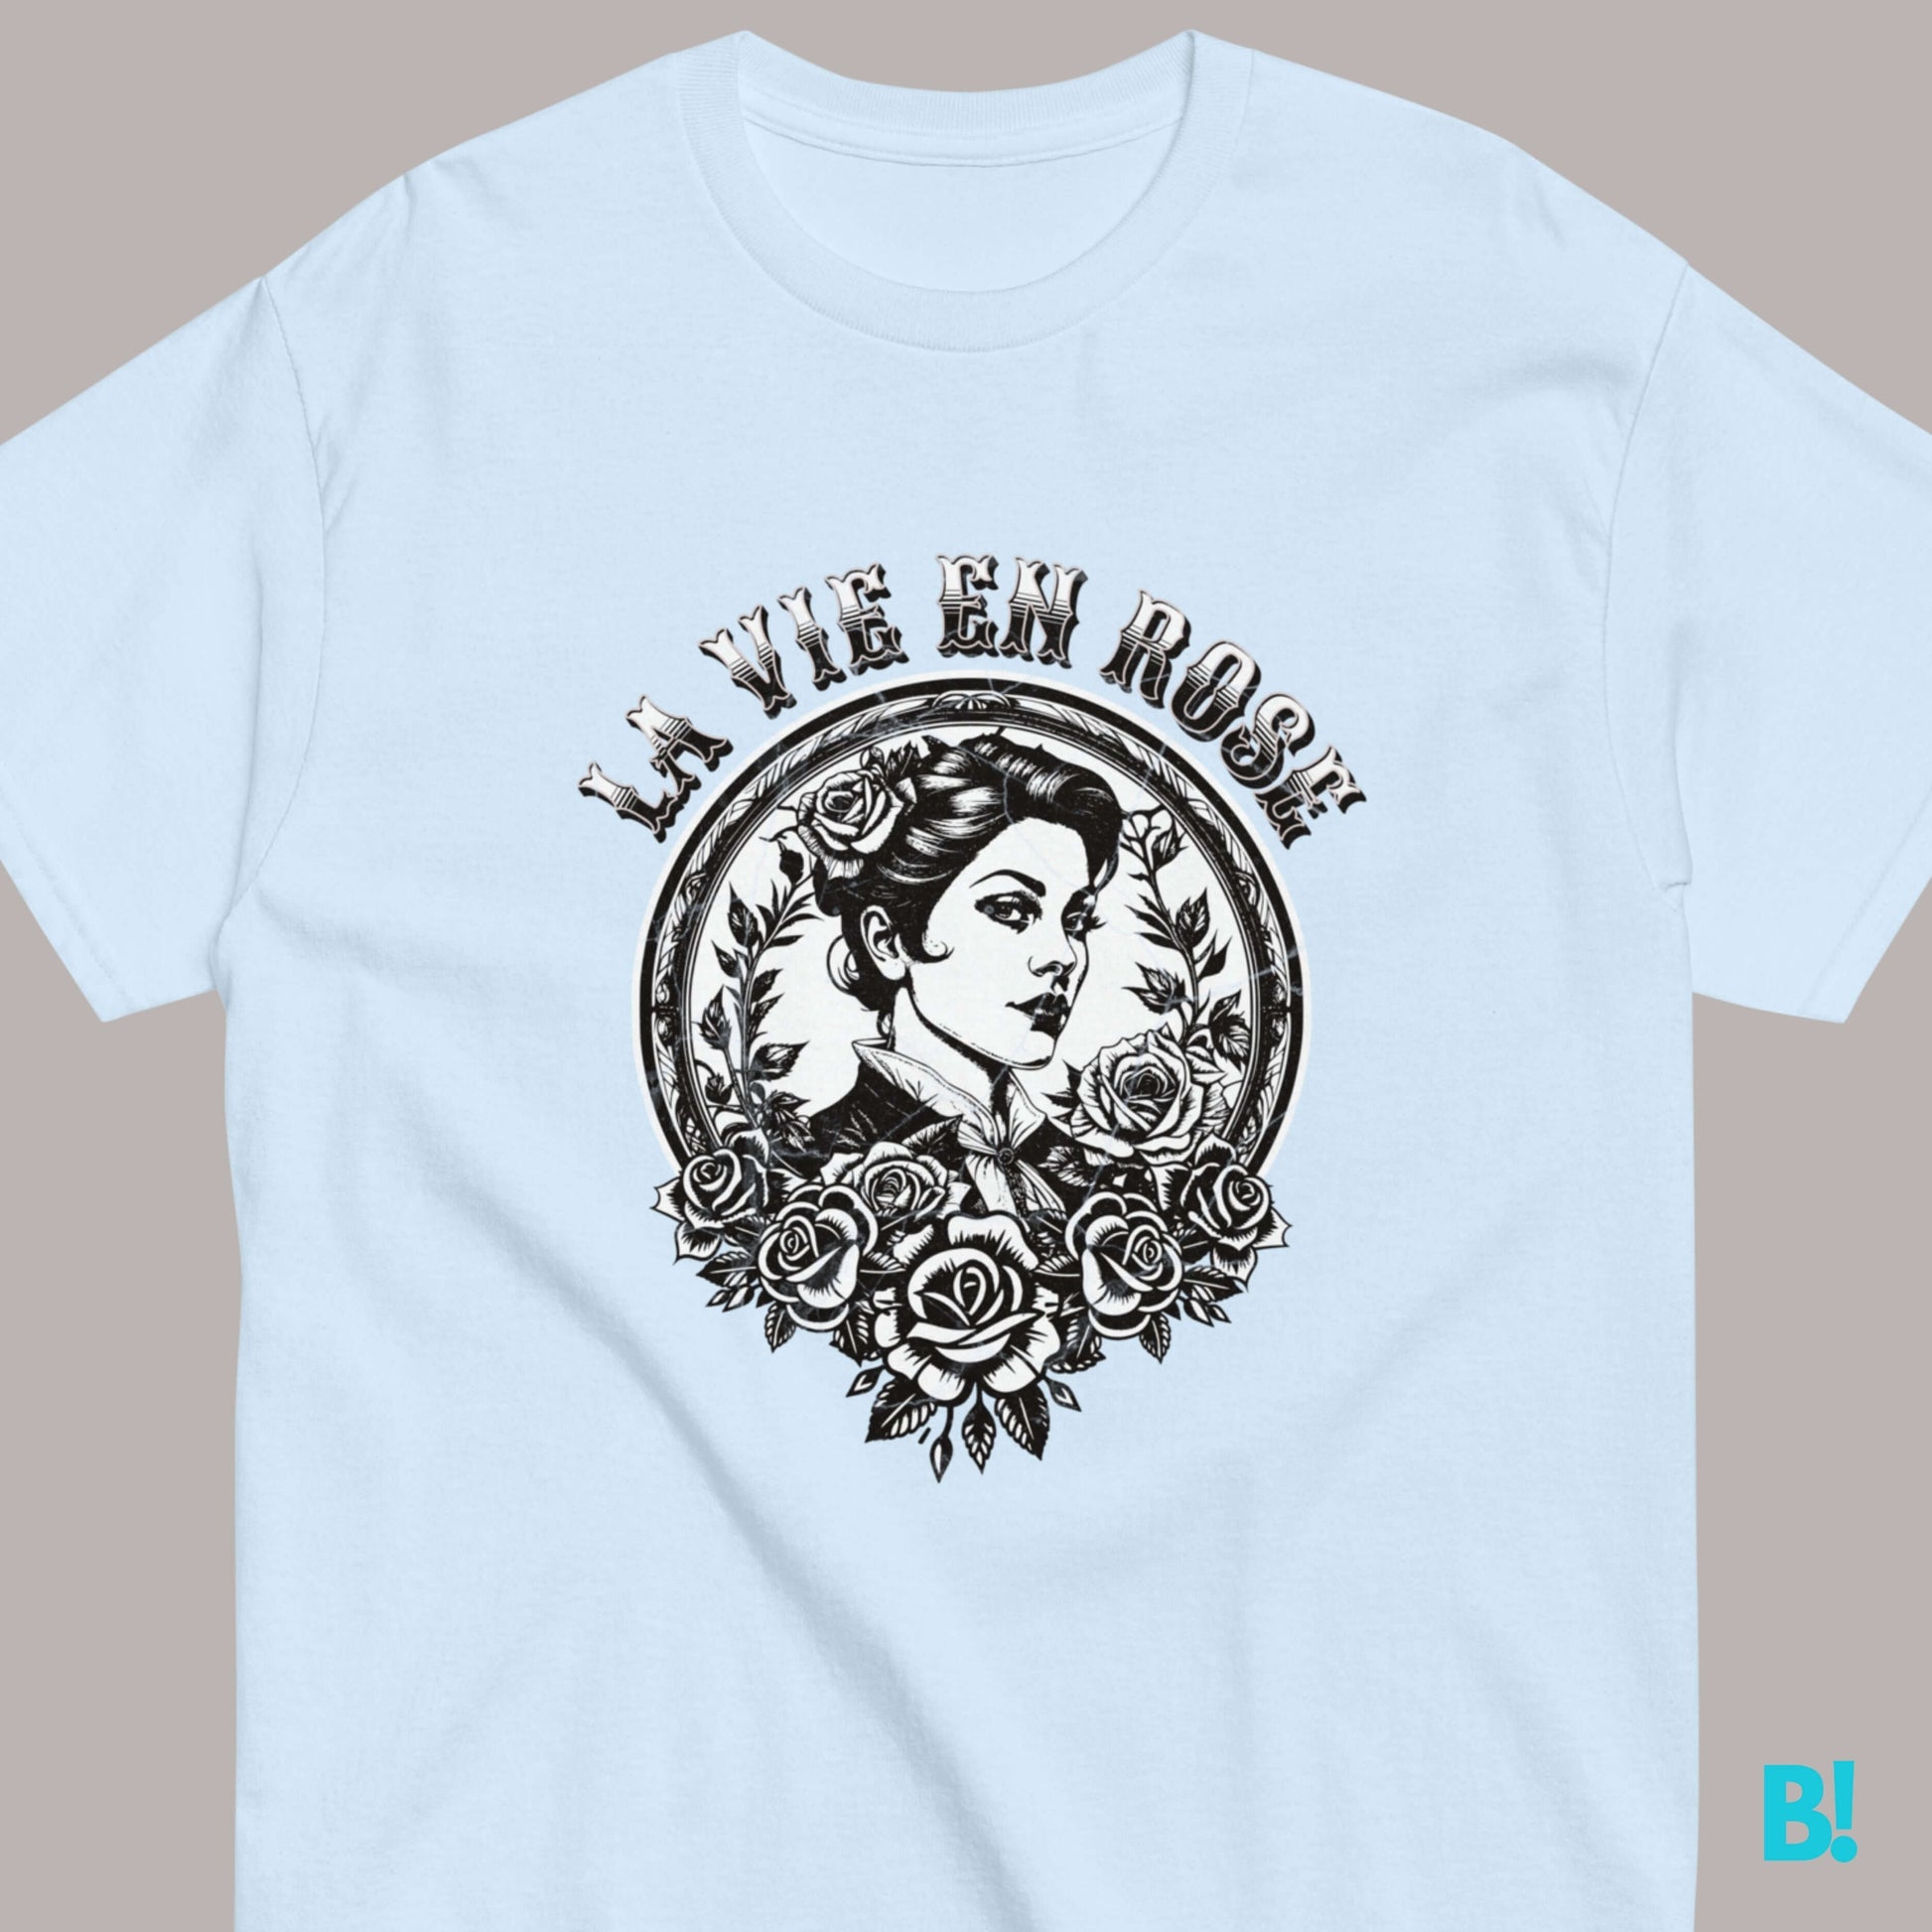 La Vie En Rose French Tattoo Retro Inspired Vintage T-Shirt Bonjour, romantics! La Vie en Rose, where every moment blooms with French romance. This enchanting tee captures the essence of Parisian elegance. Embrace the beauty of life in full bloom and pain